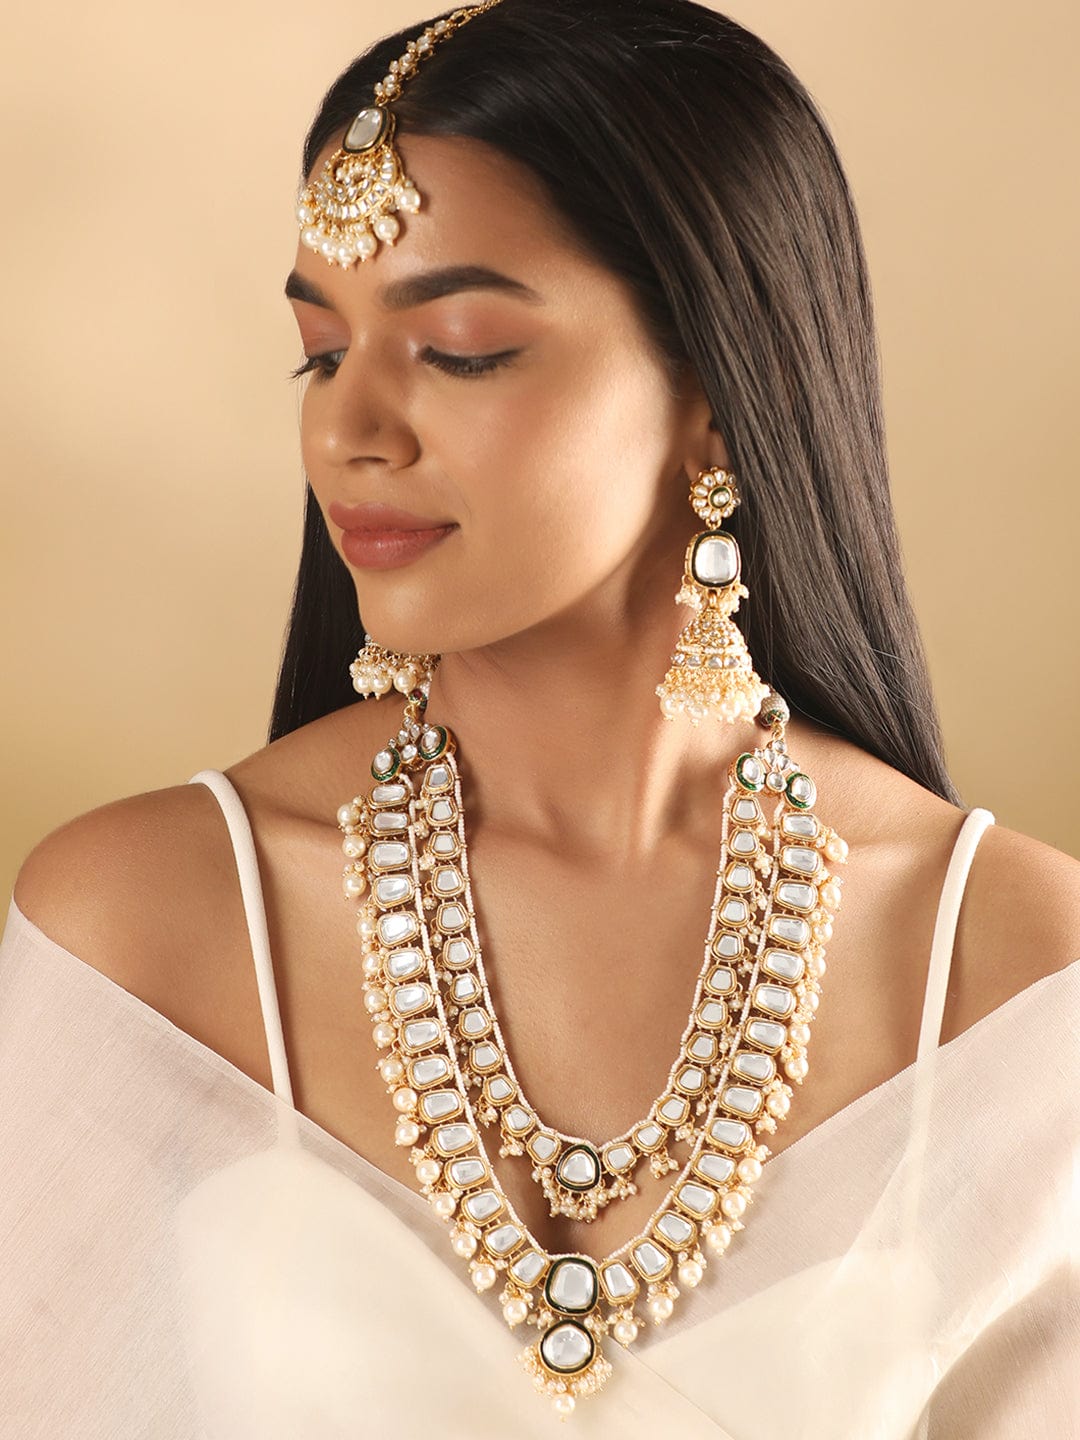 Pearl Necklace Set with Golg Plating  White Pearl Strings and Enamel Work   For Saree or Gown  Maahika Pearl Necklace Set by Blingvine